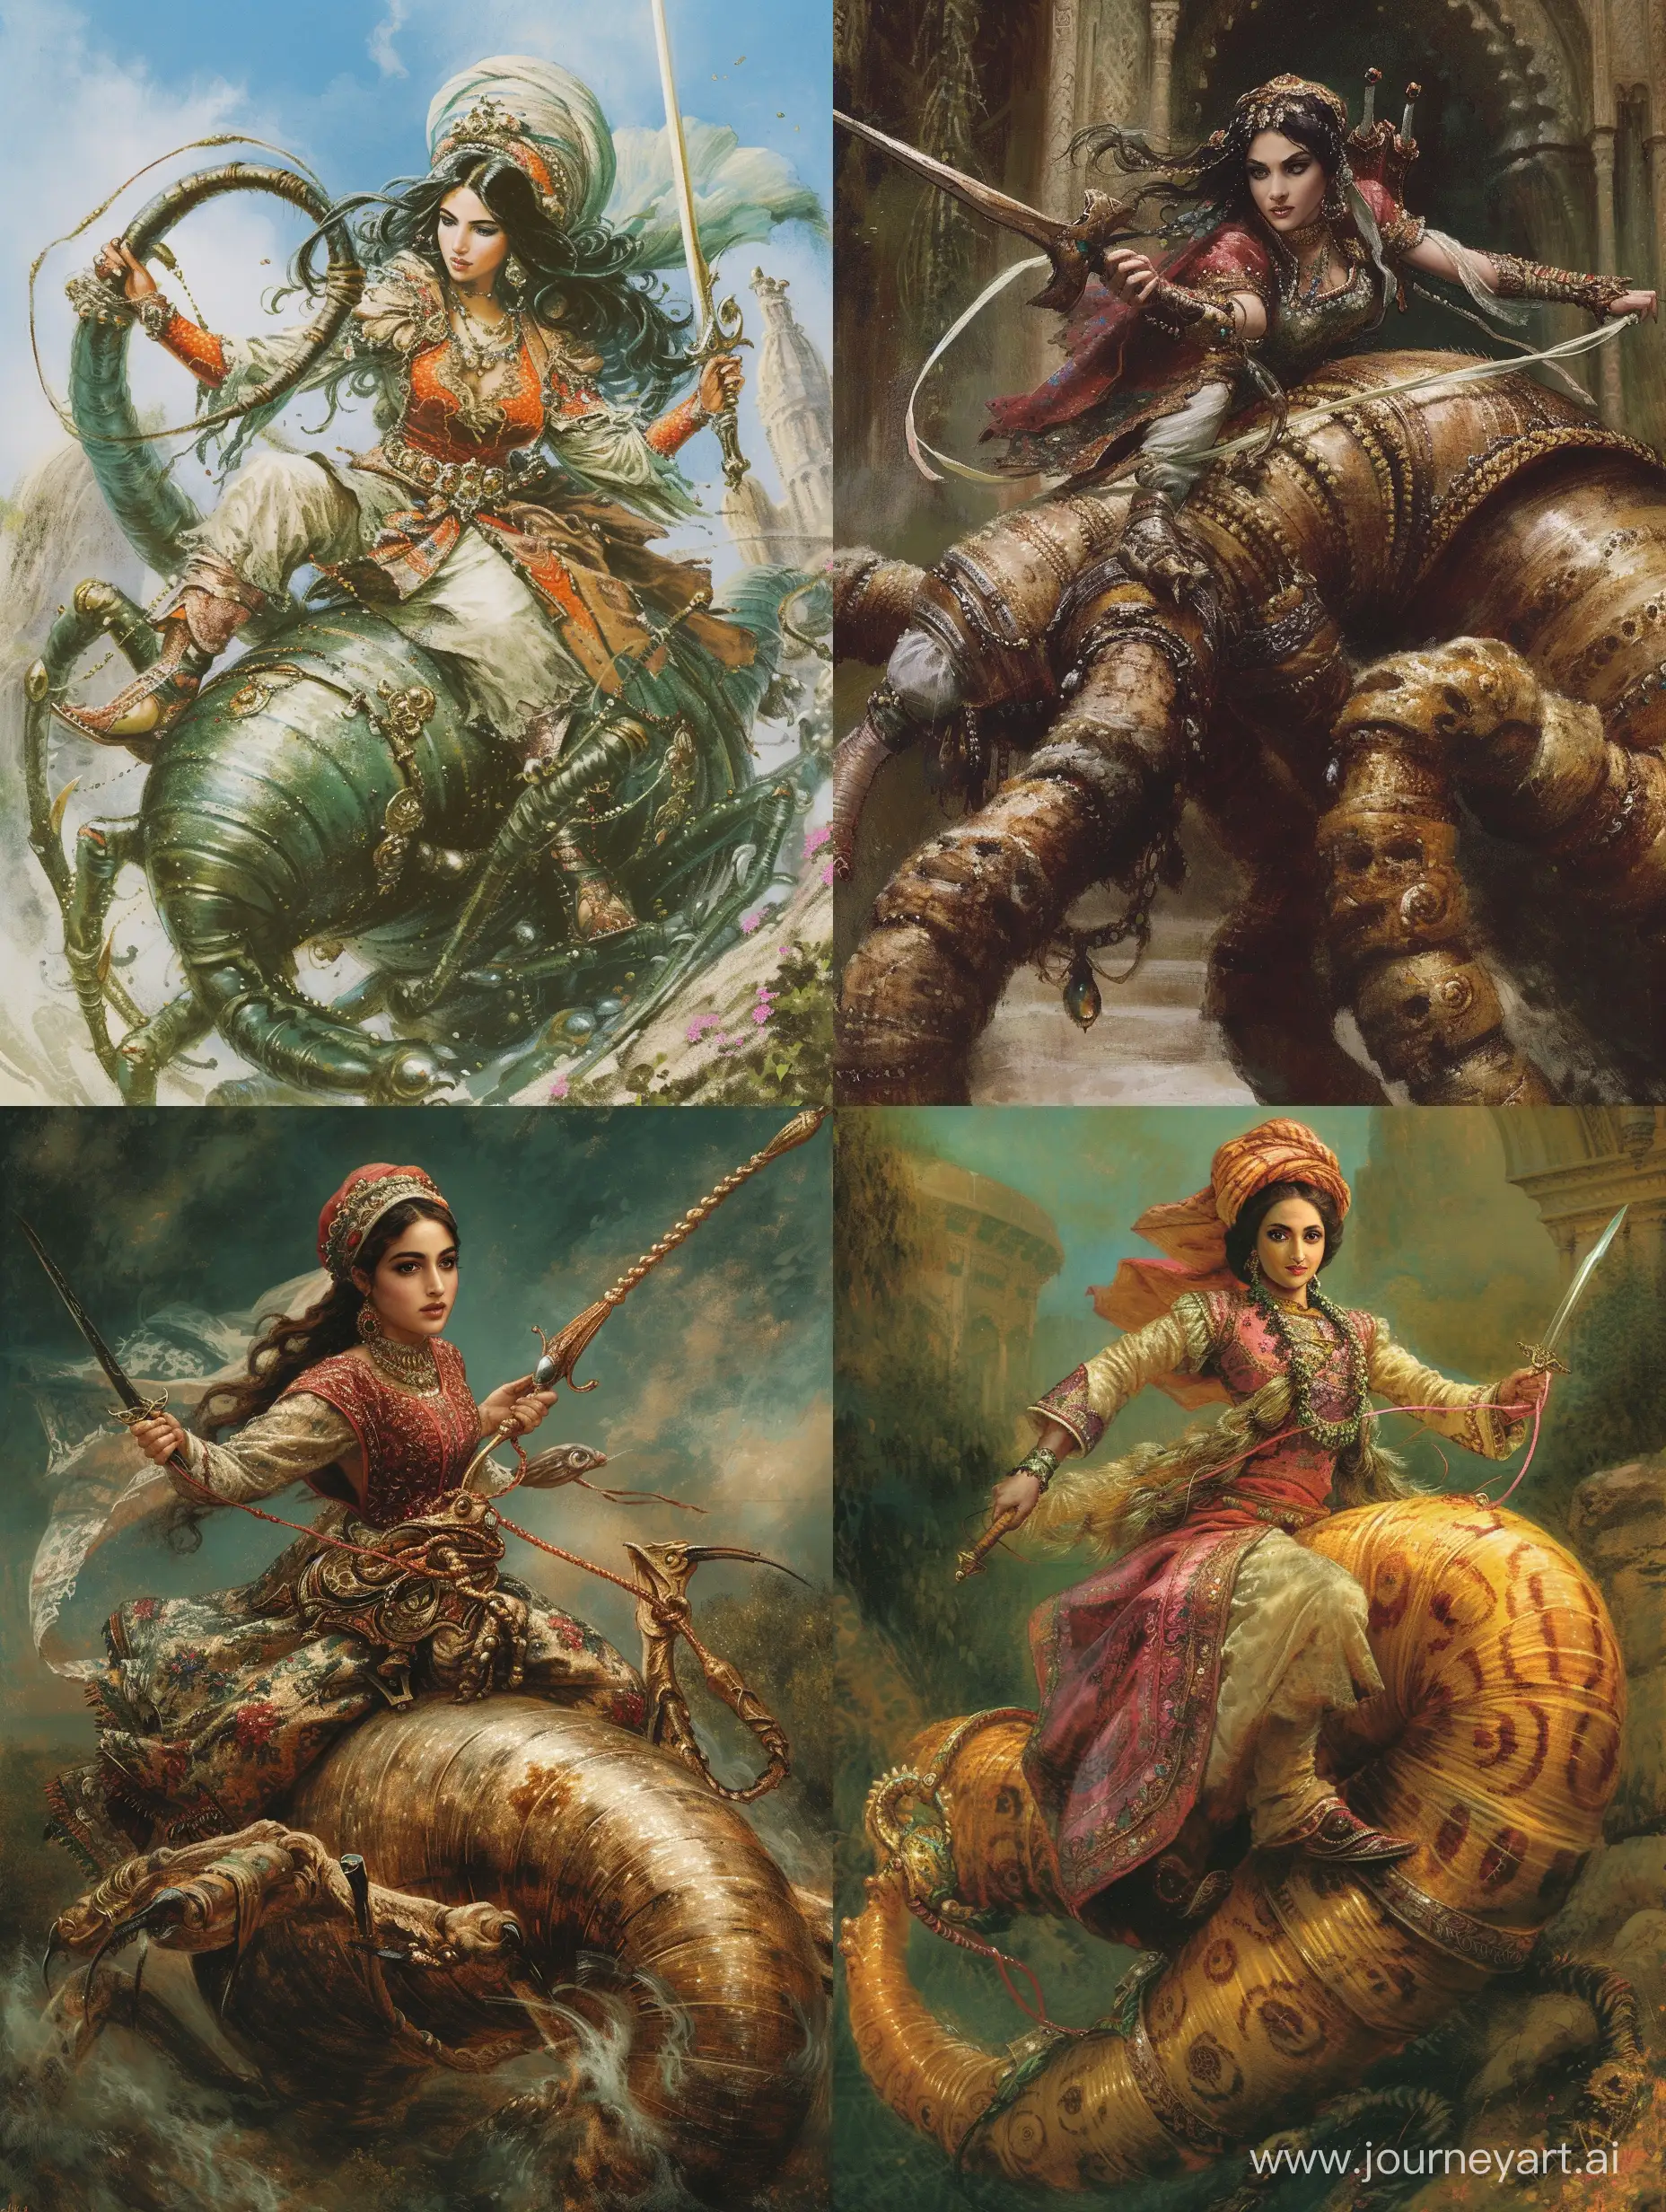 The beautiful Persian princess who rides the worm is riding on the back of a giant silkworm and is holding the reins of the worm with one hand and a sword with the other hand.